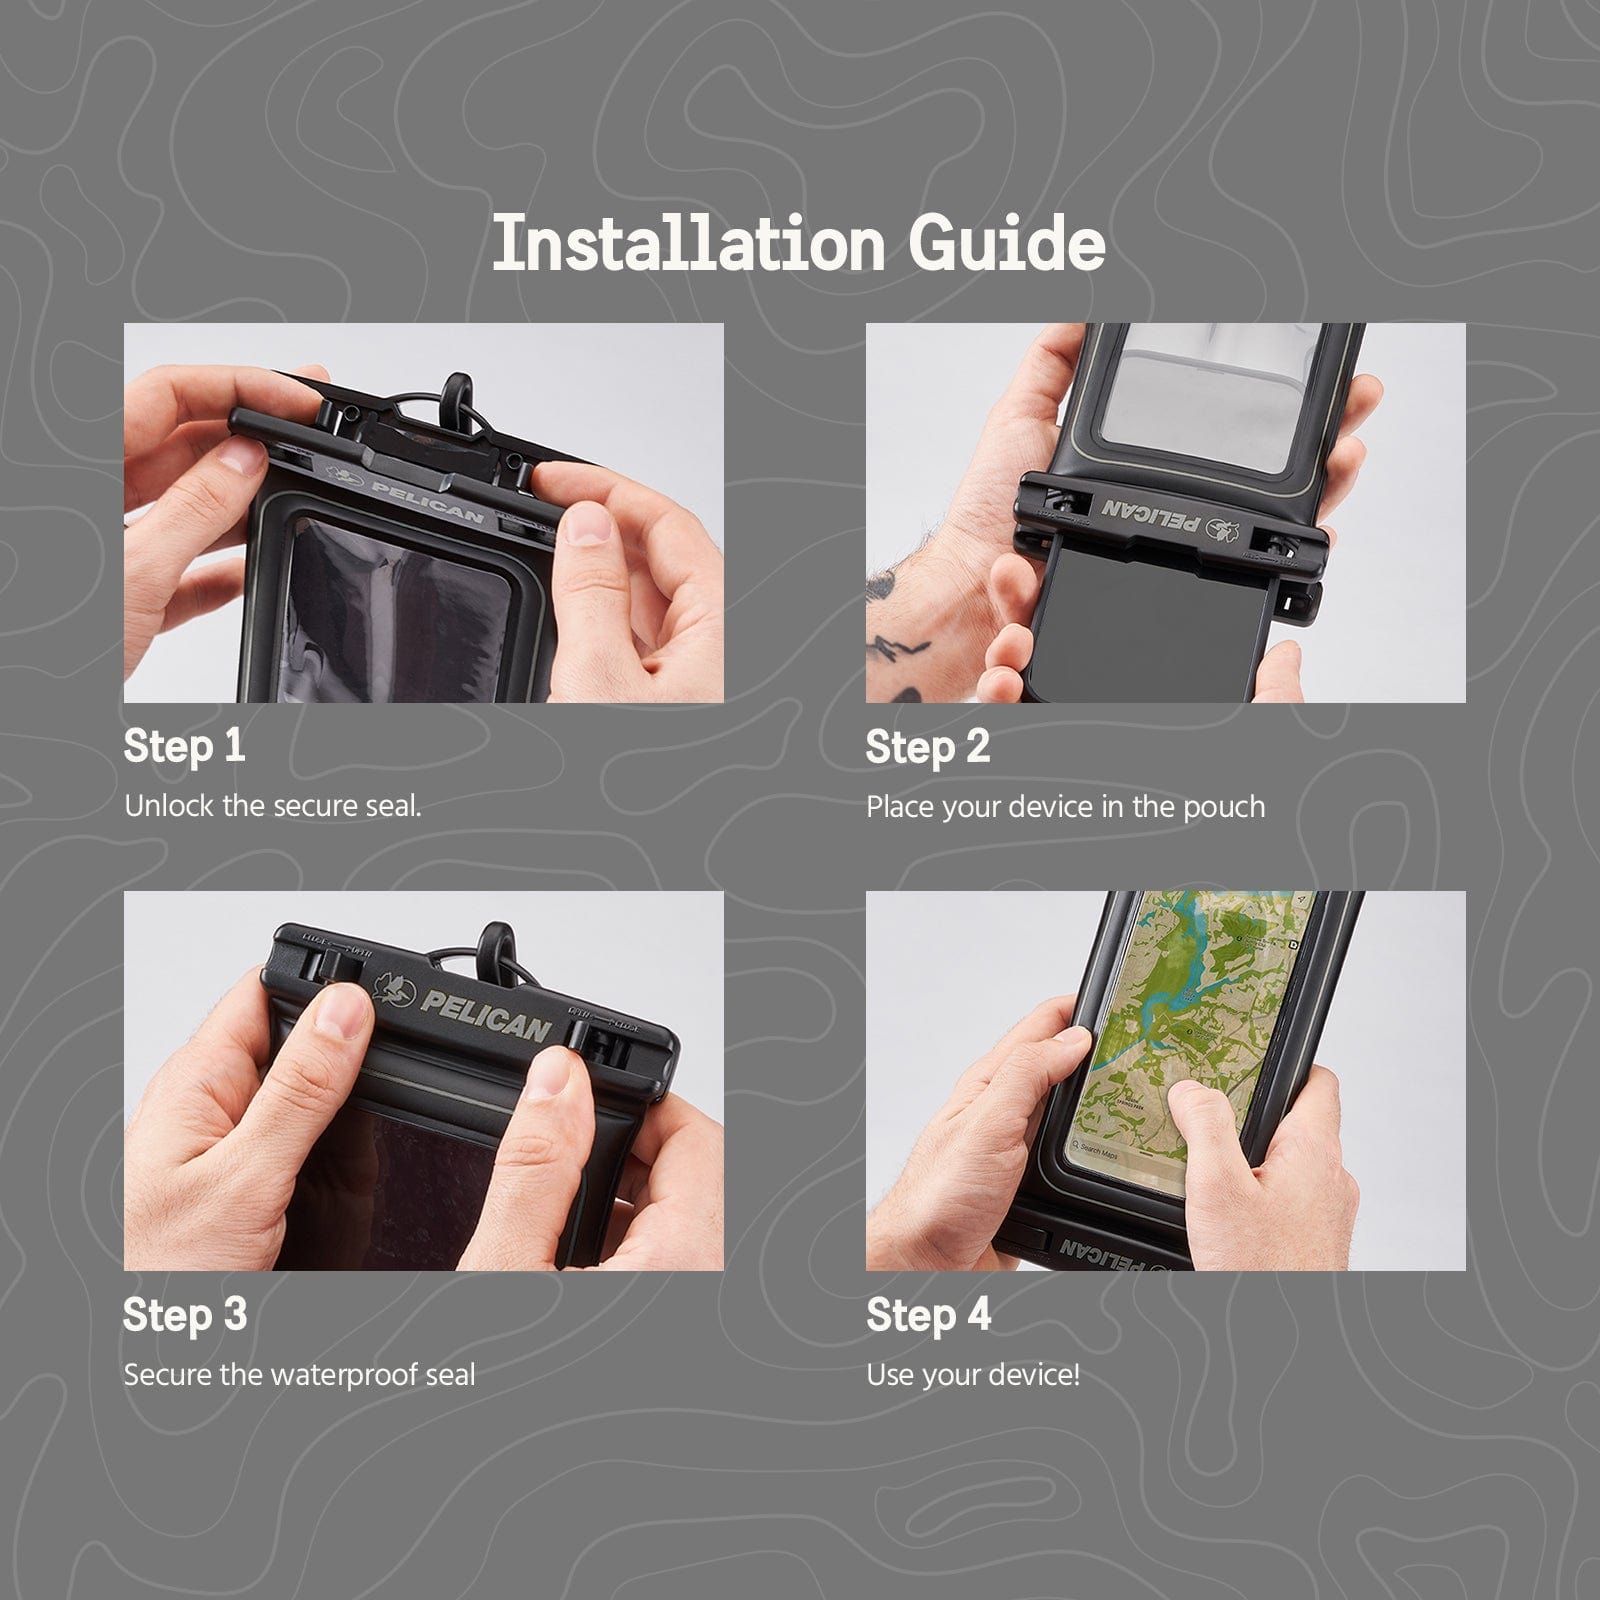 Installation Guide. Step 1 Unlock the secure seal. Step 2 Place your device in the pouch. Step 3 Secure the waterproof seal. Step 4 Use your device!